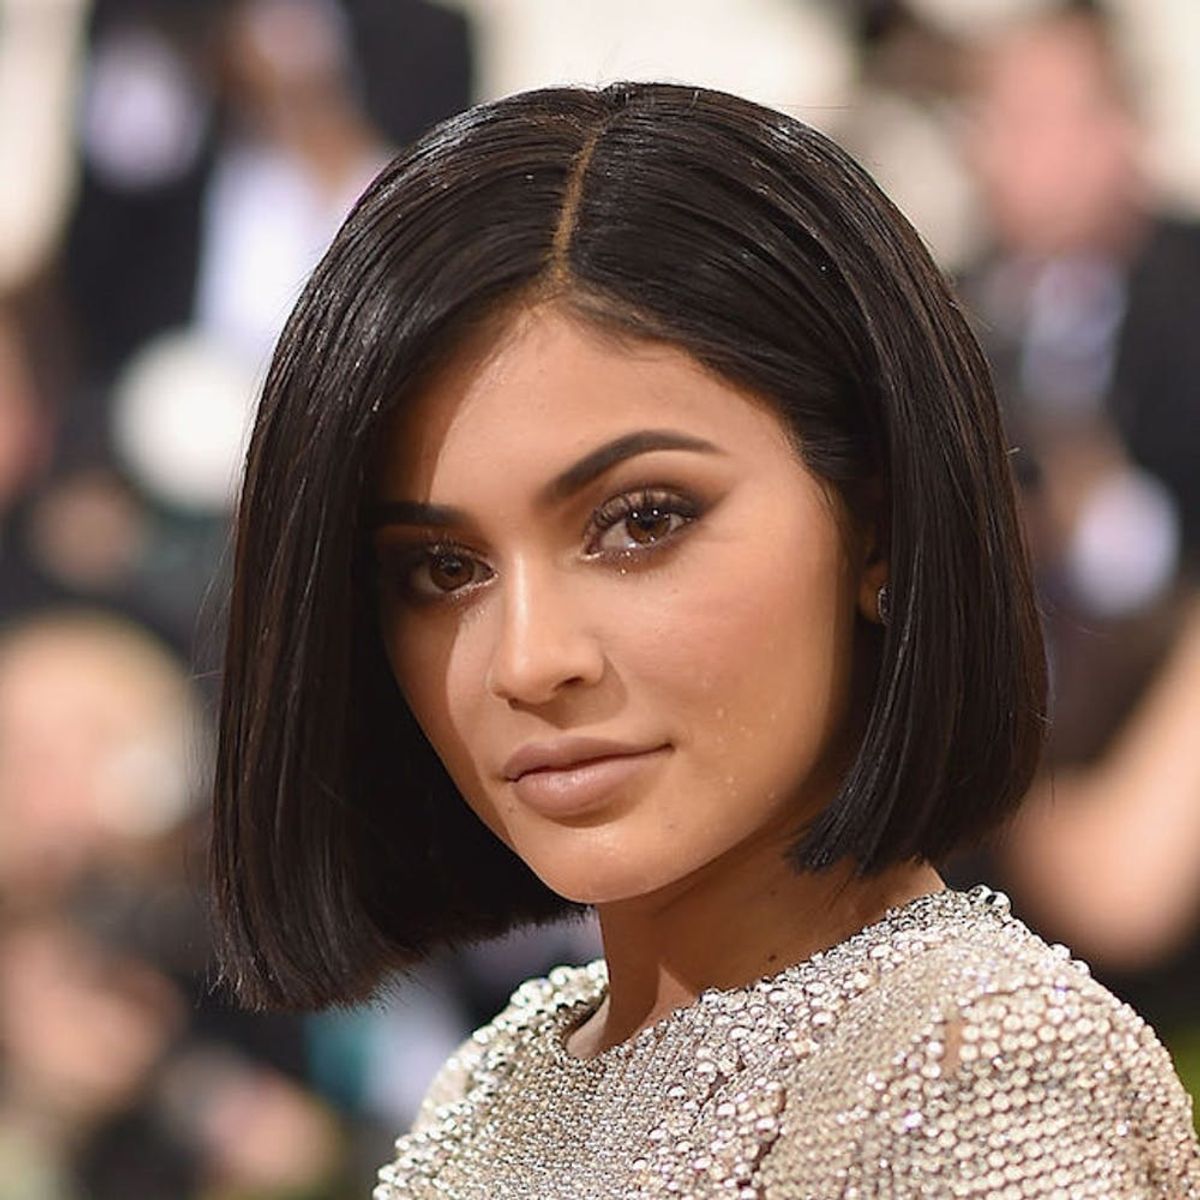 Morning Buzz! Here’s Your First Look at Kylie Jenner’s New Platinum Blonde Hair + More